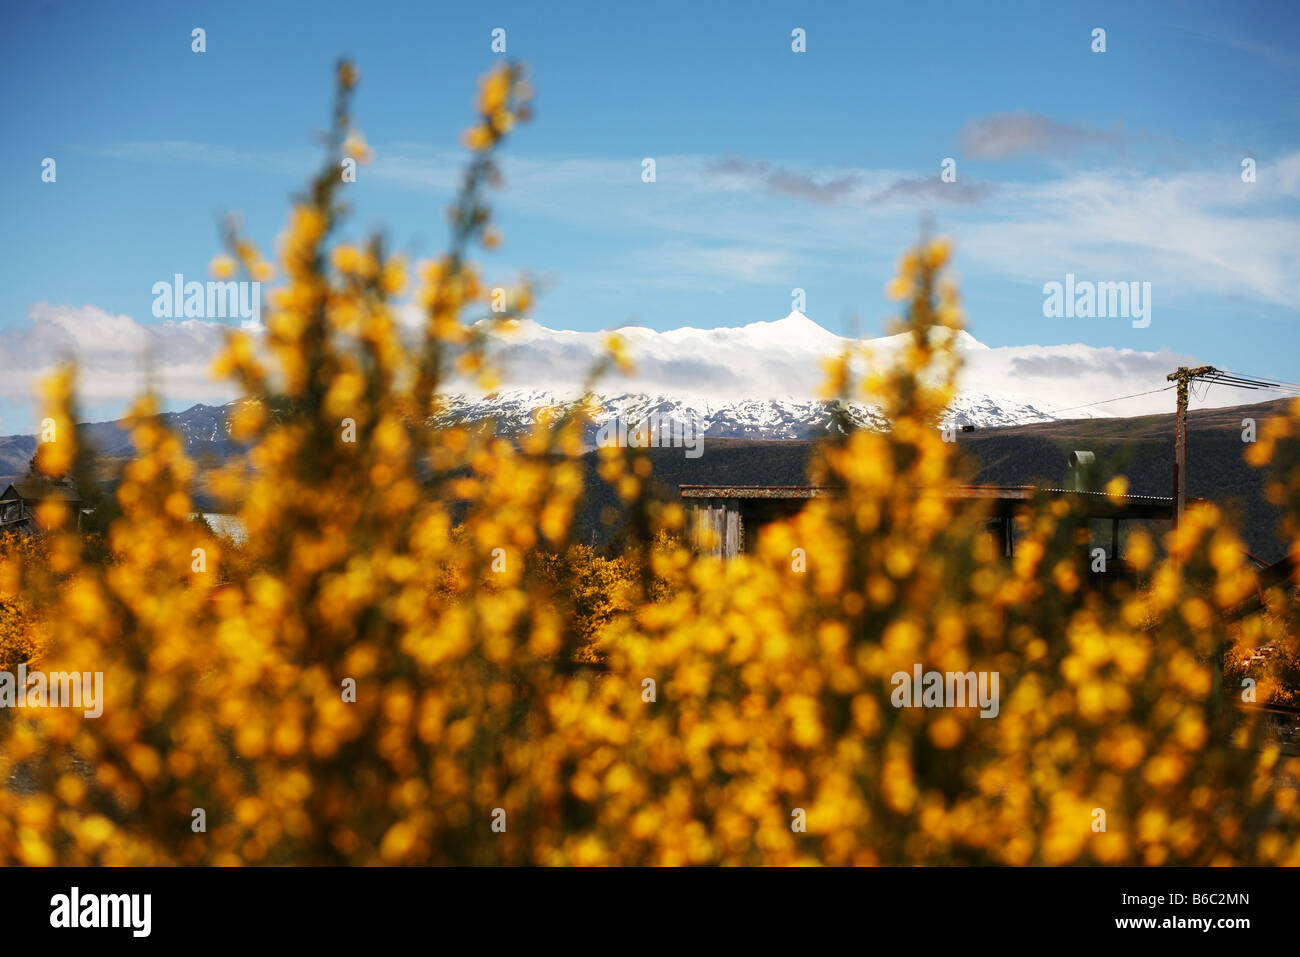 Kowhai the national flower of New Zealand is seen in front of a snowy mountain range on the South Island of New Zealand Stock Photo